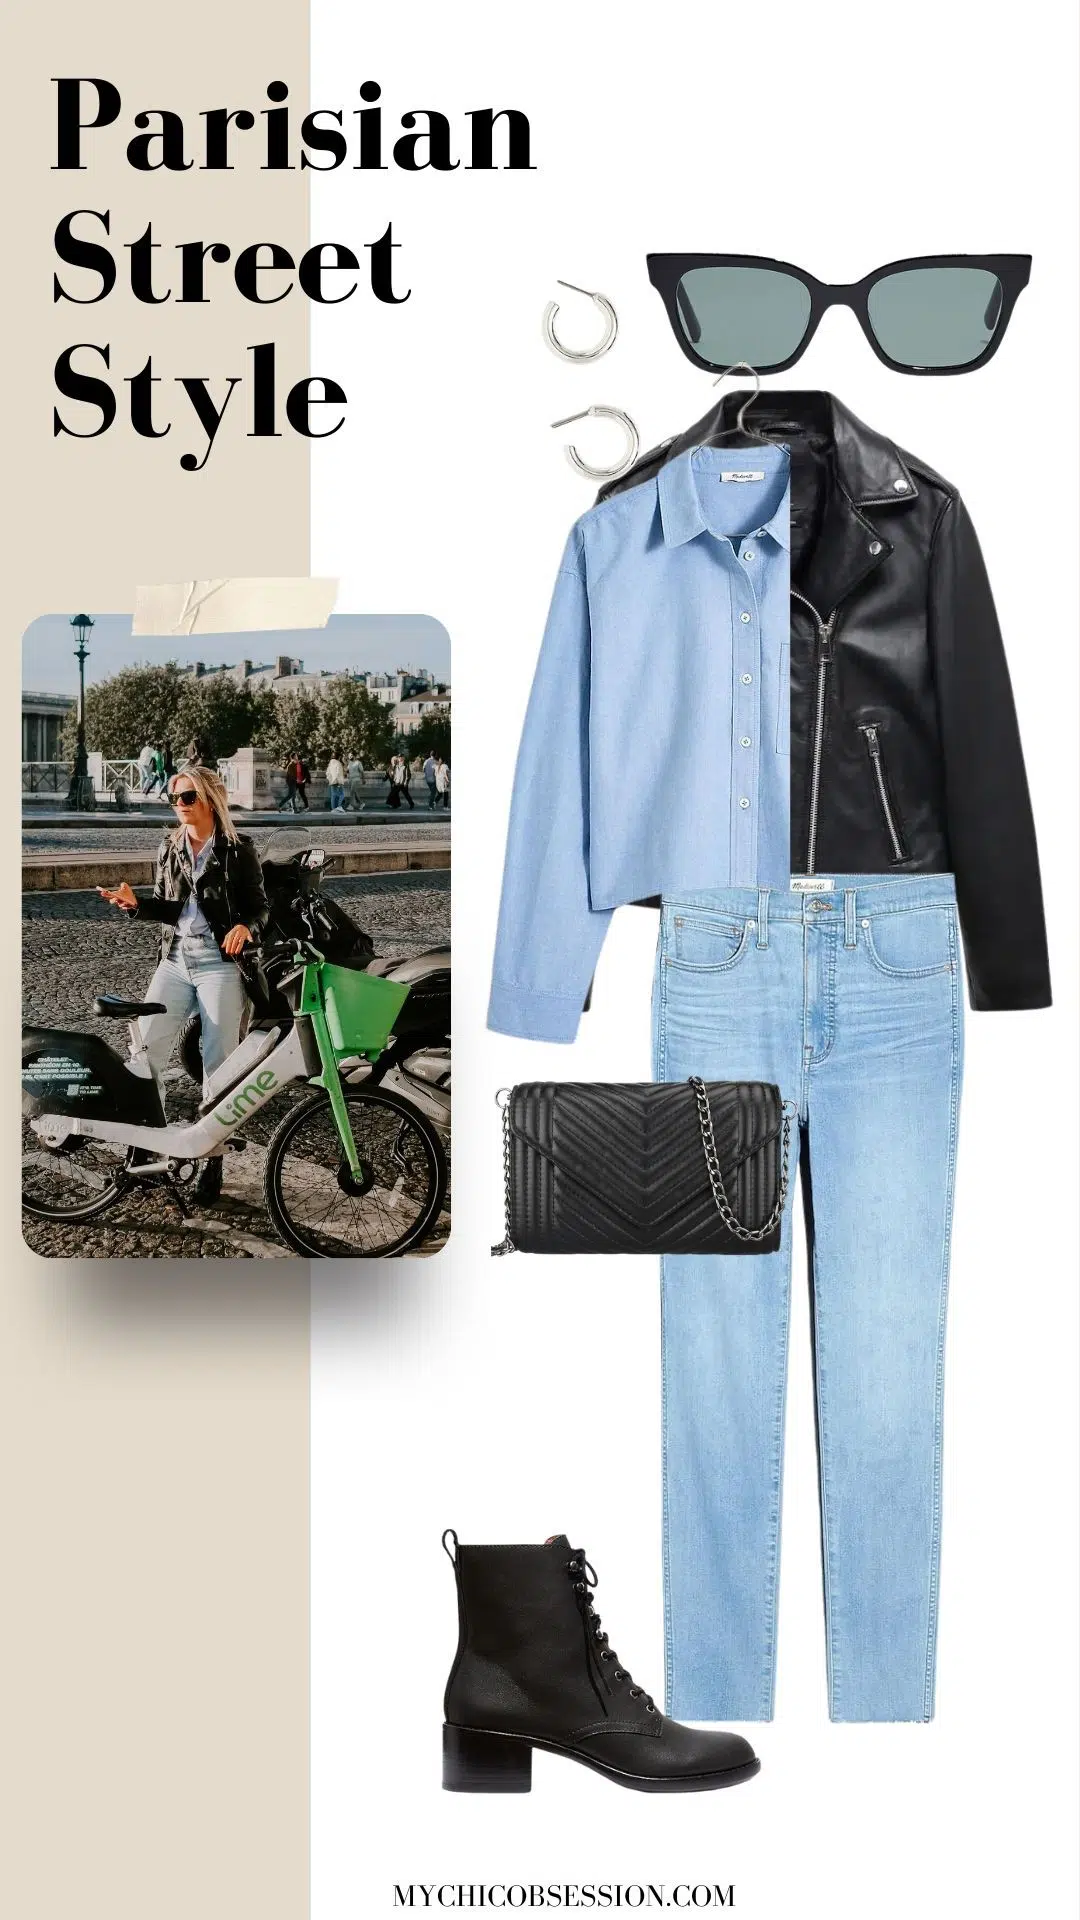 blue oxford shirt + motorcycle jacket + lace-up boots